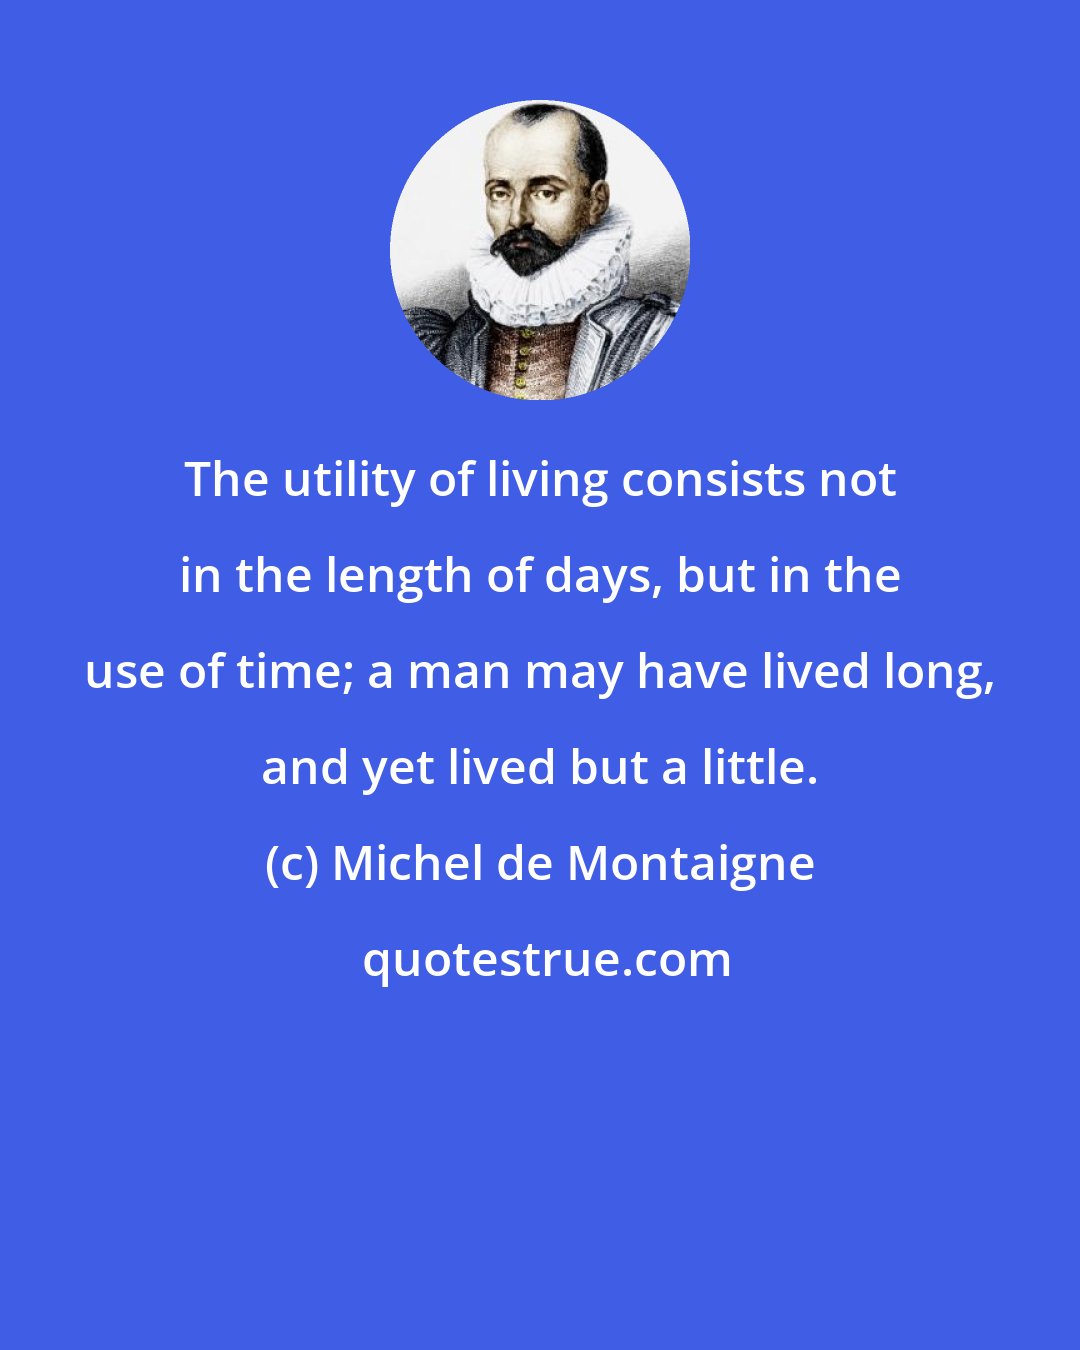 Michel de Montaigne: The utility of living consists not in the length of days, but in the use of time; a man may have lived long, and yet lived but a little.